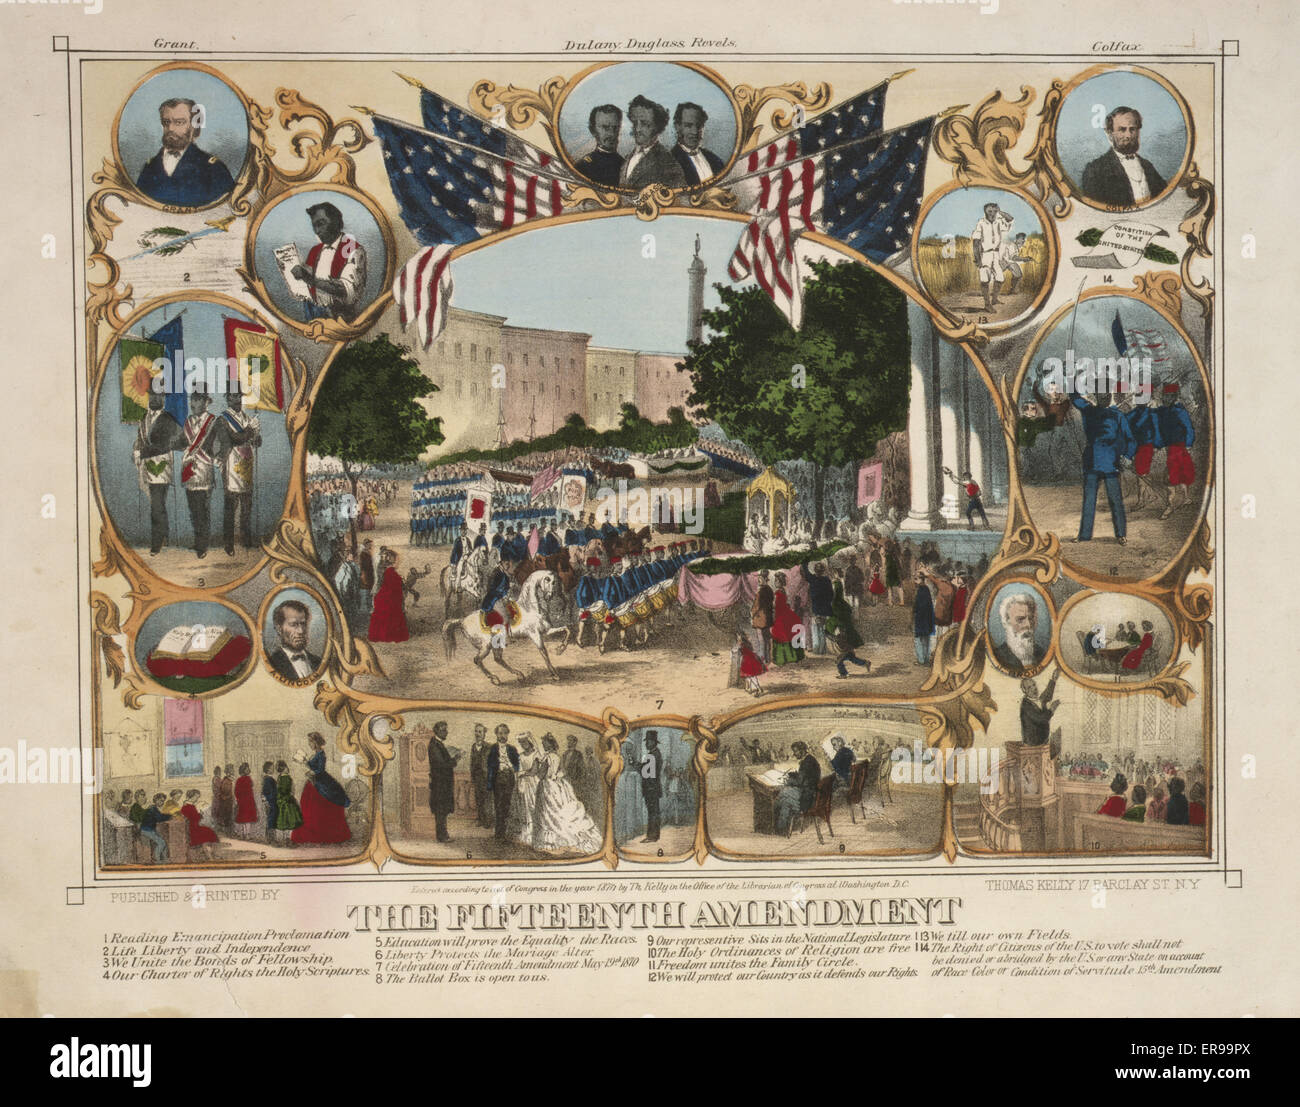 The Fifteenth amendment. Parade surrounded by portraits and vignettes of Black life, illustrating rights granted by the 15th amendment. Date c1870. Stock Photo